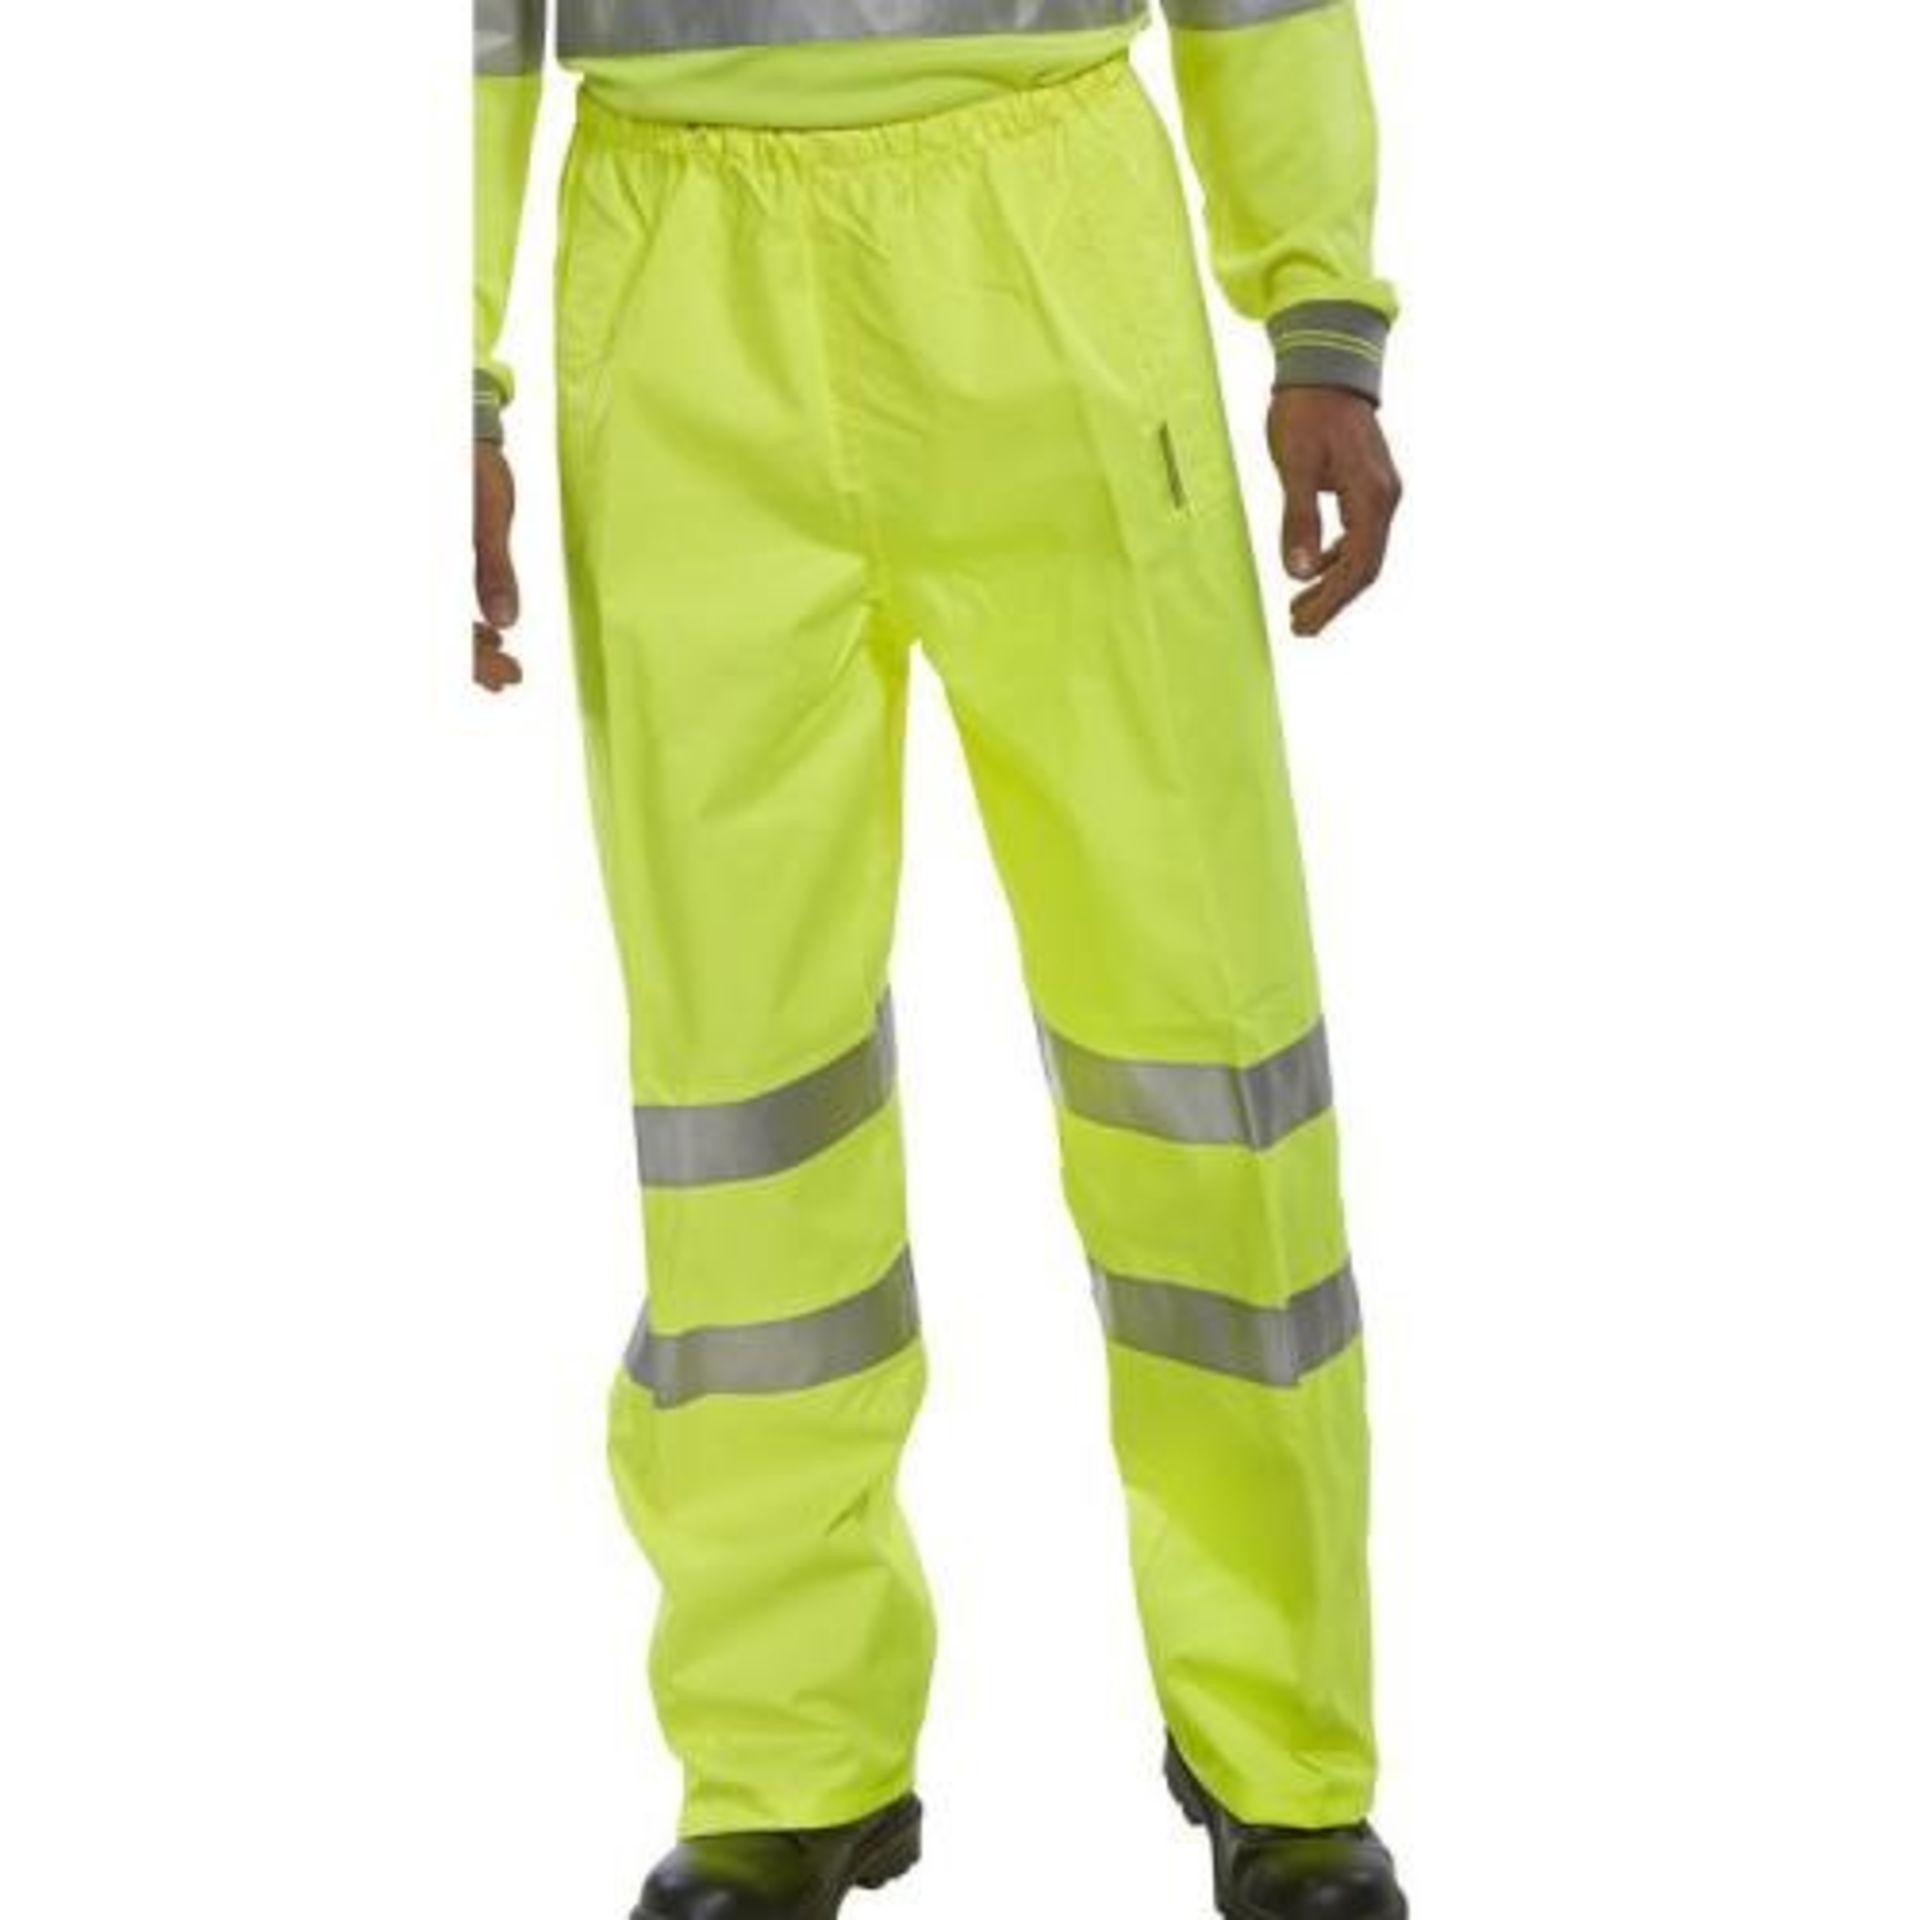 1 AS NEW BAGGED B SEEN HI VIS TROUSERS IN YELLOW, SIZE XL / PN NPN / RRP £19.00 (VIEWING HIGHLY